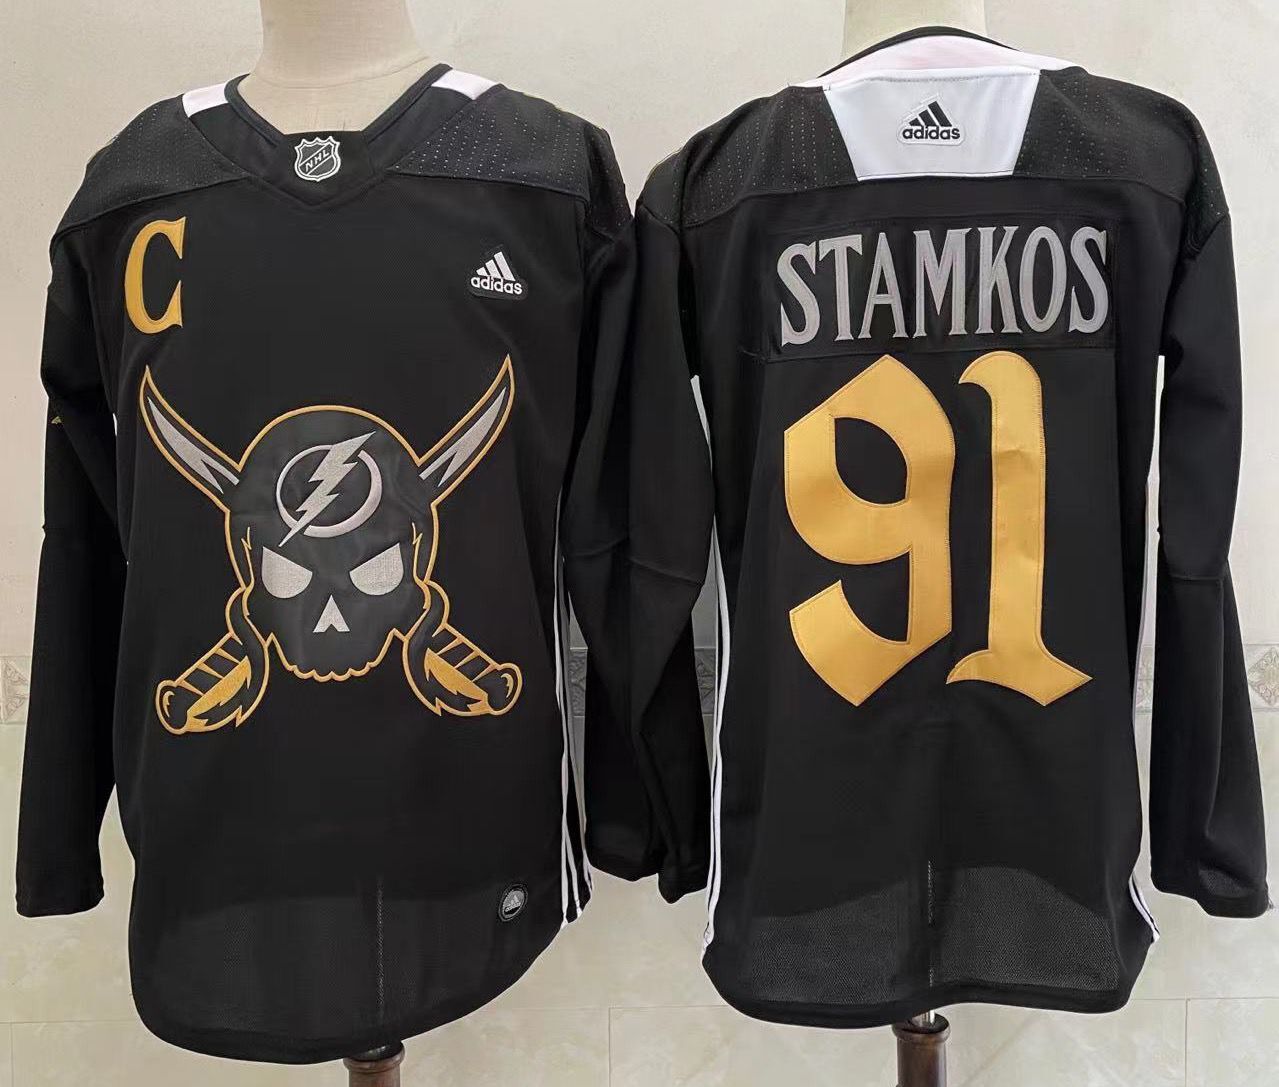 Men's Tampa Bay Lightning #91 Steven Stamkos Black Pirate Themed Warmup Authentic Jersey